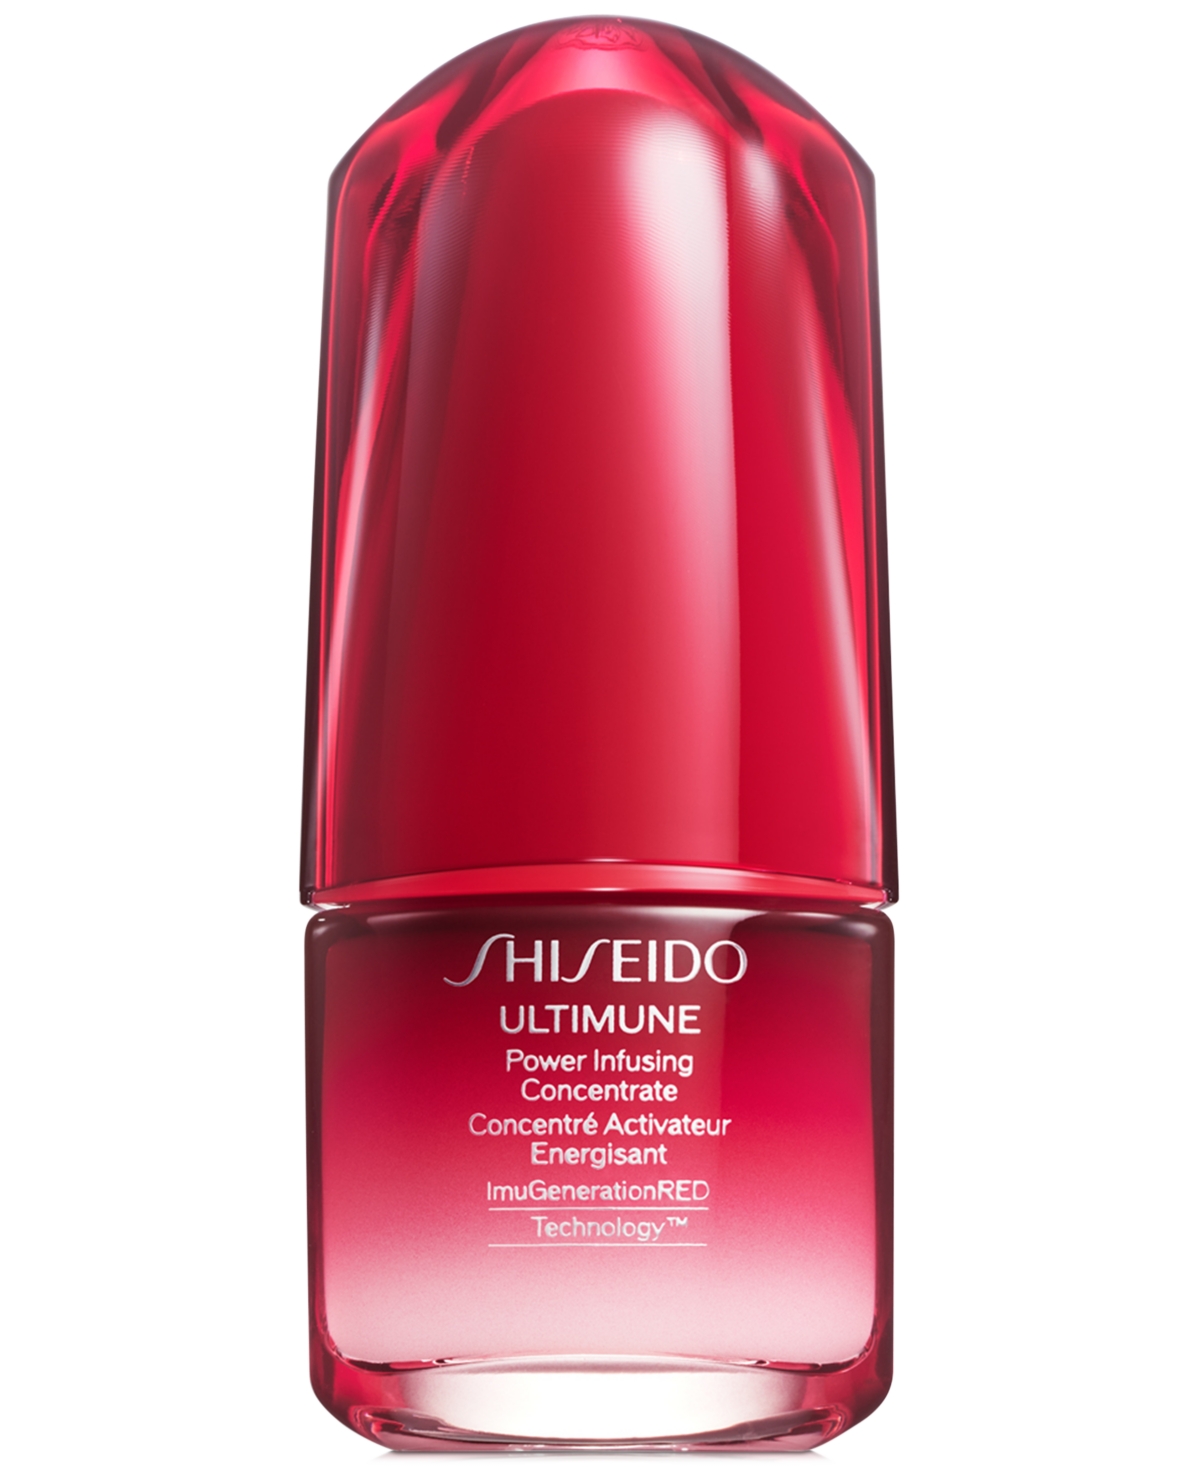 Shiseido concentrate. Ultimune концентрат шисейдо Power infusing. Shiseido Ultimune концентрат. Shiseido Ultimune оригинал отличие. Ultimate Power infusing Concentrate 3.0.